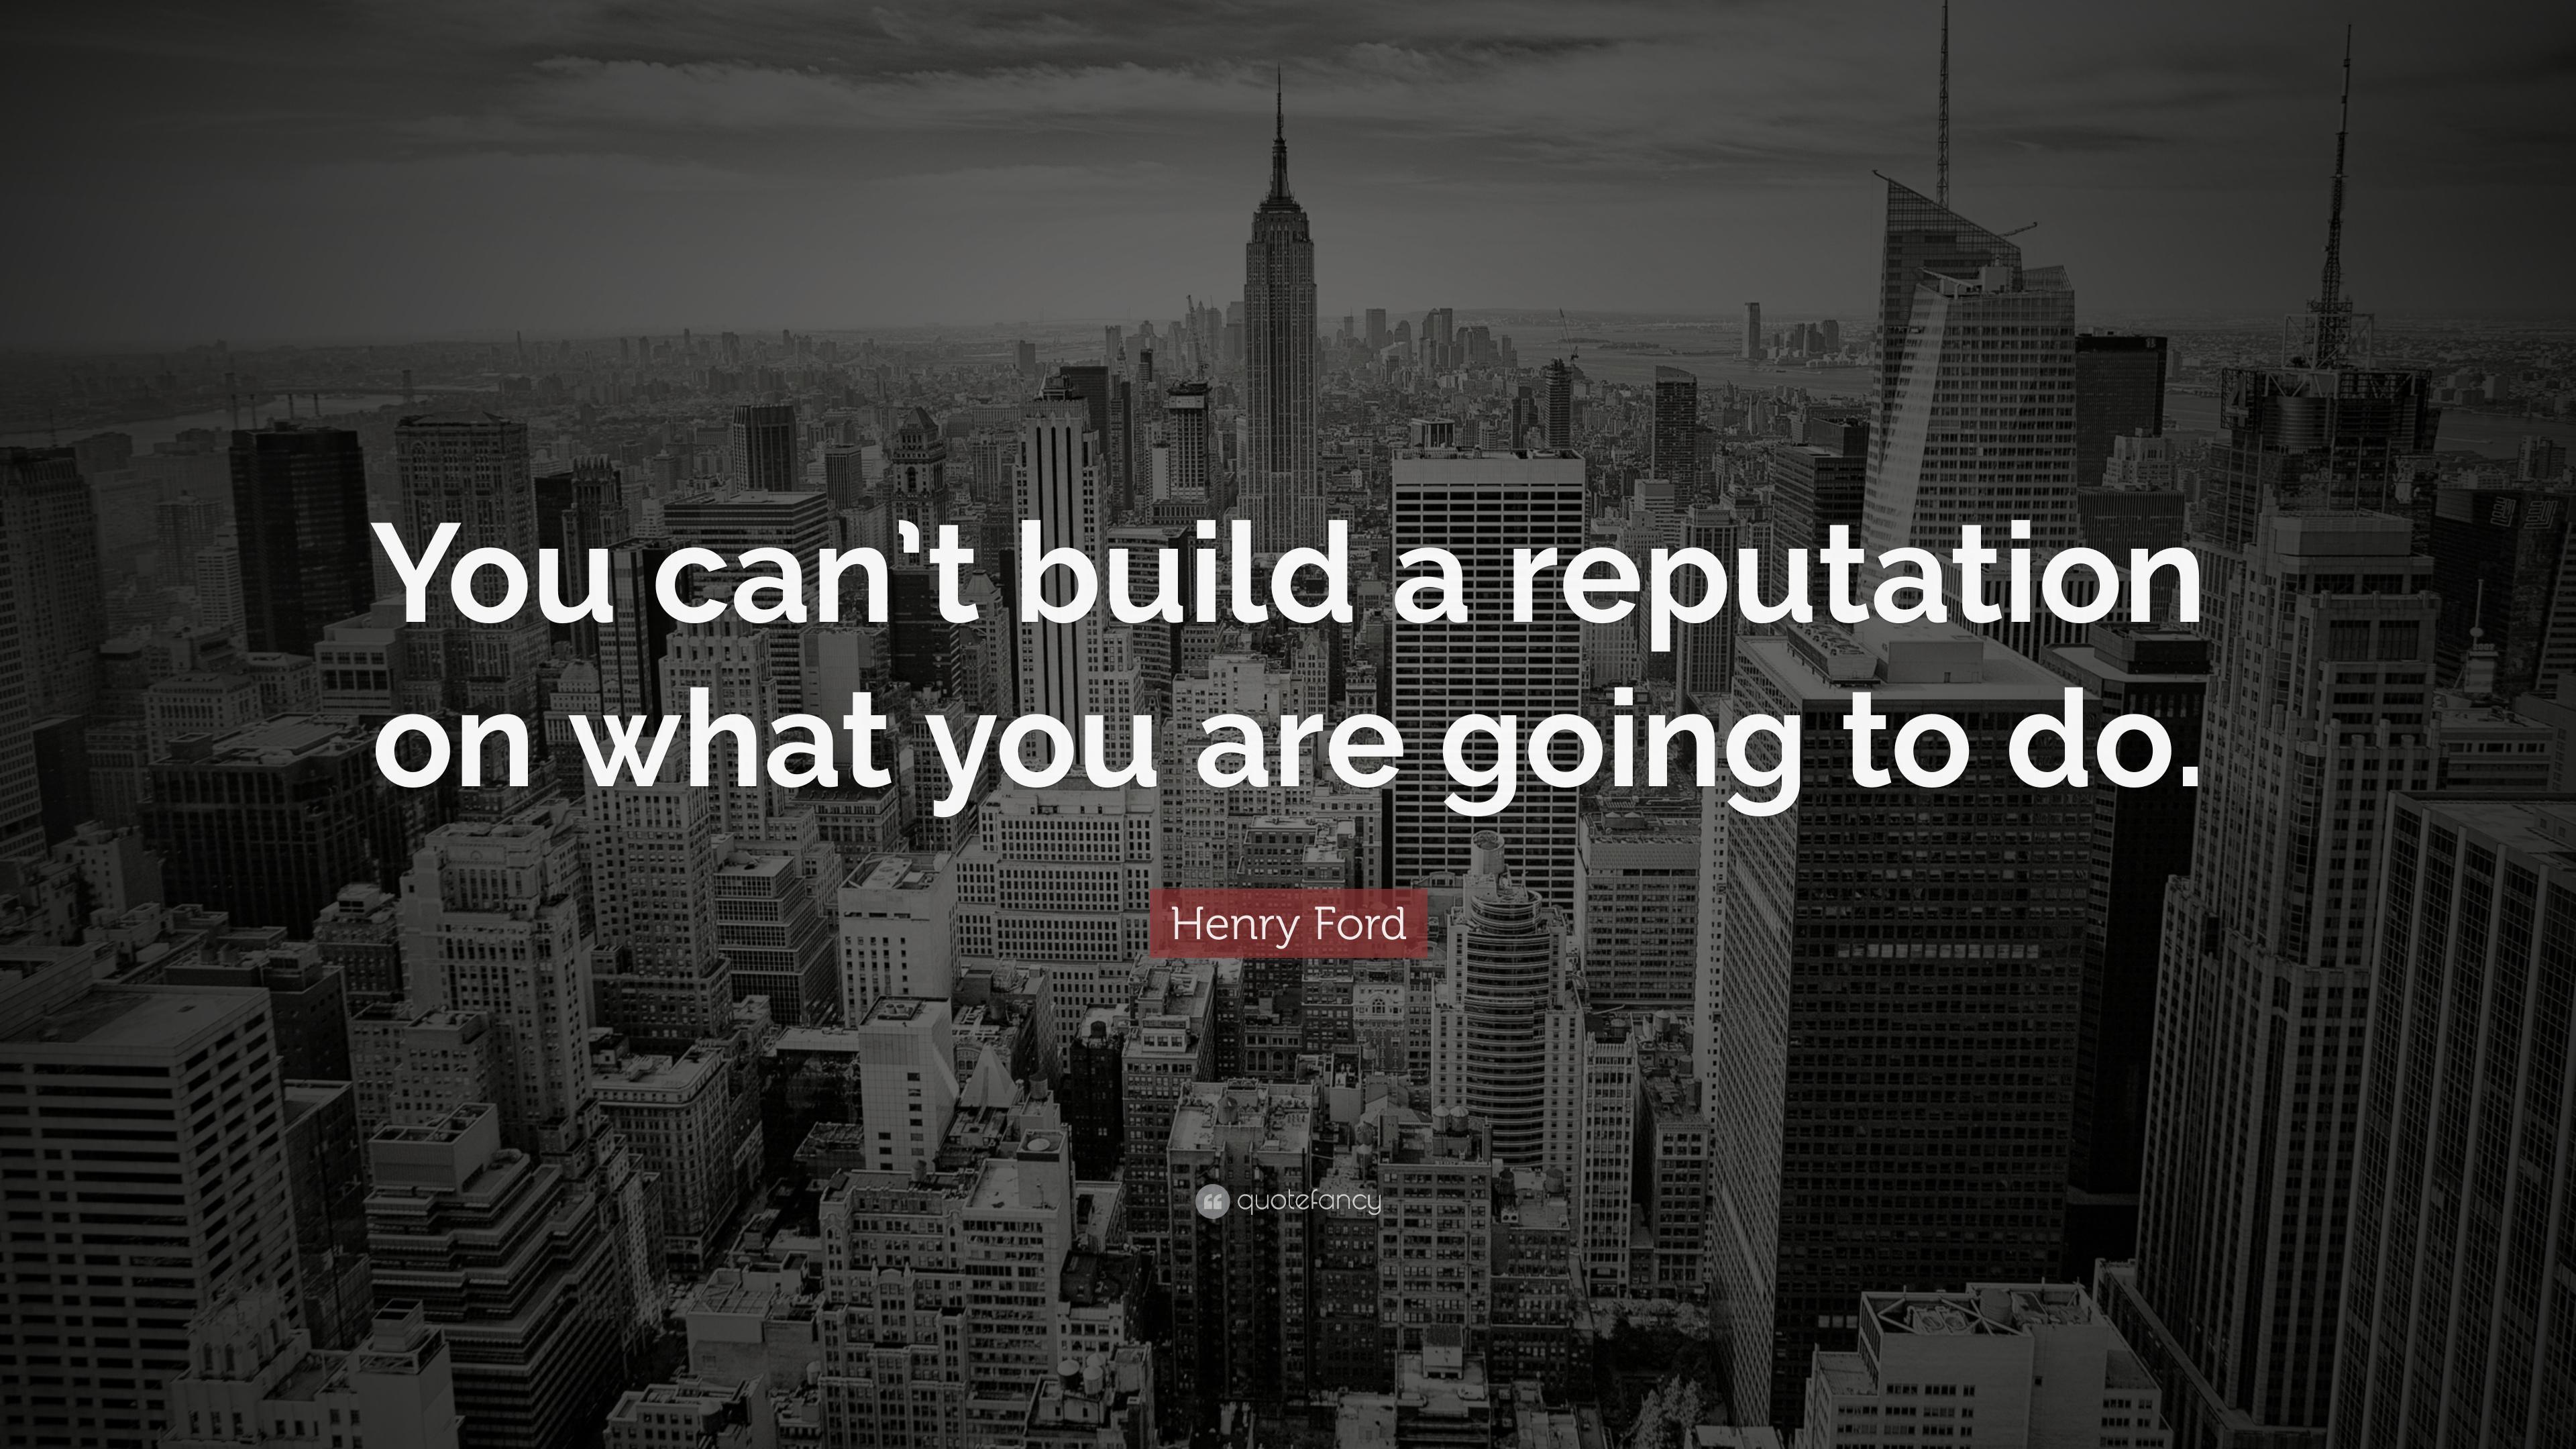 Henry Ford Quote: “You can't build a reputation on what you are